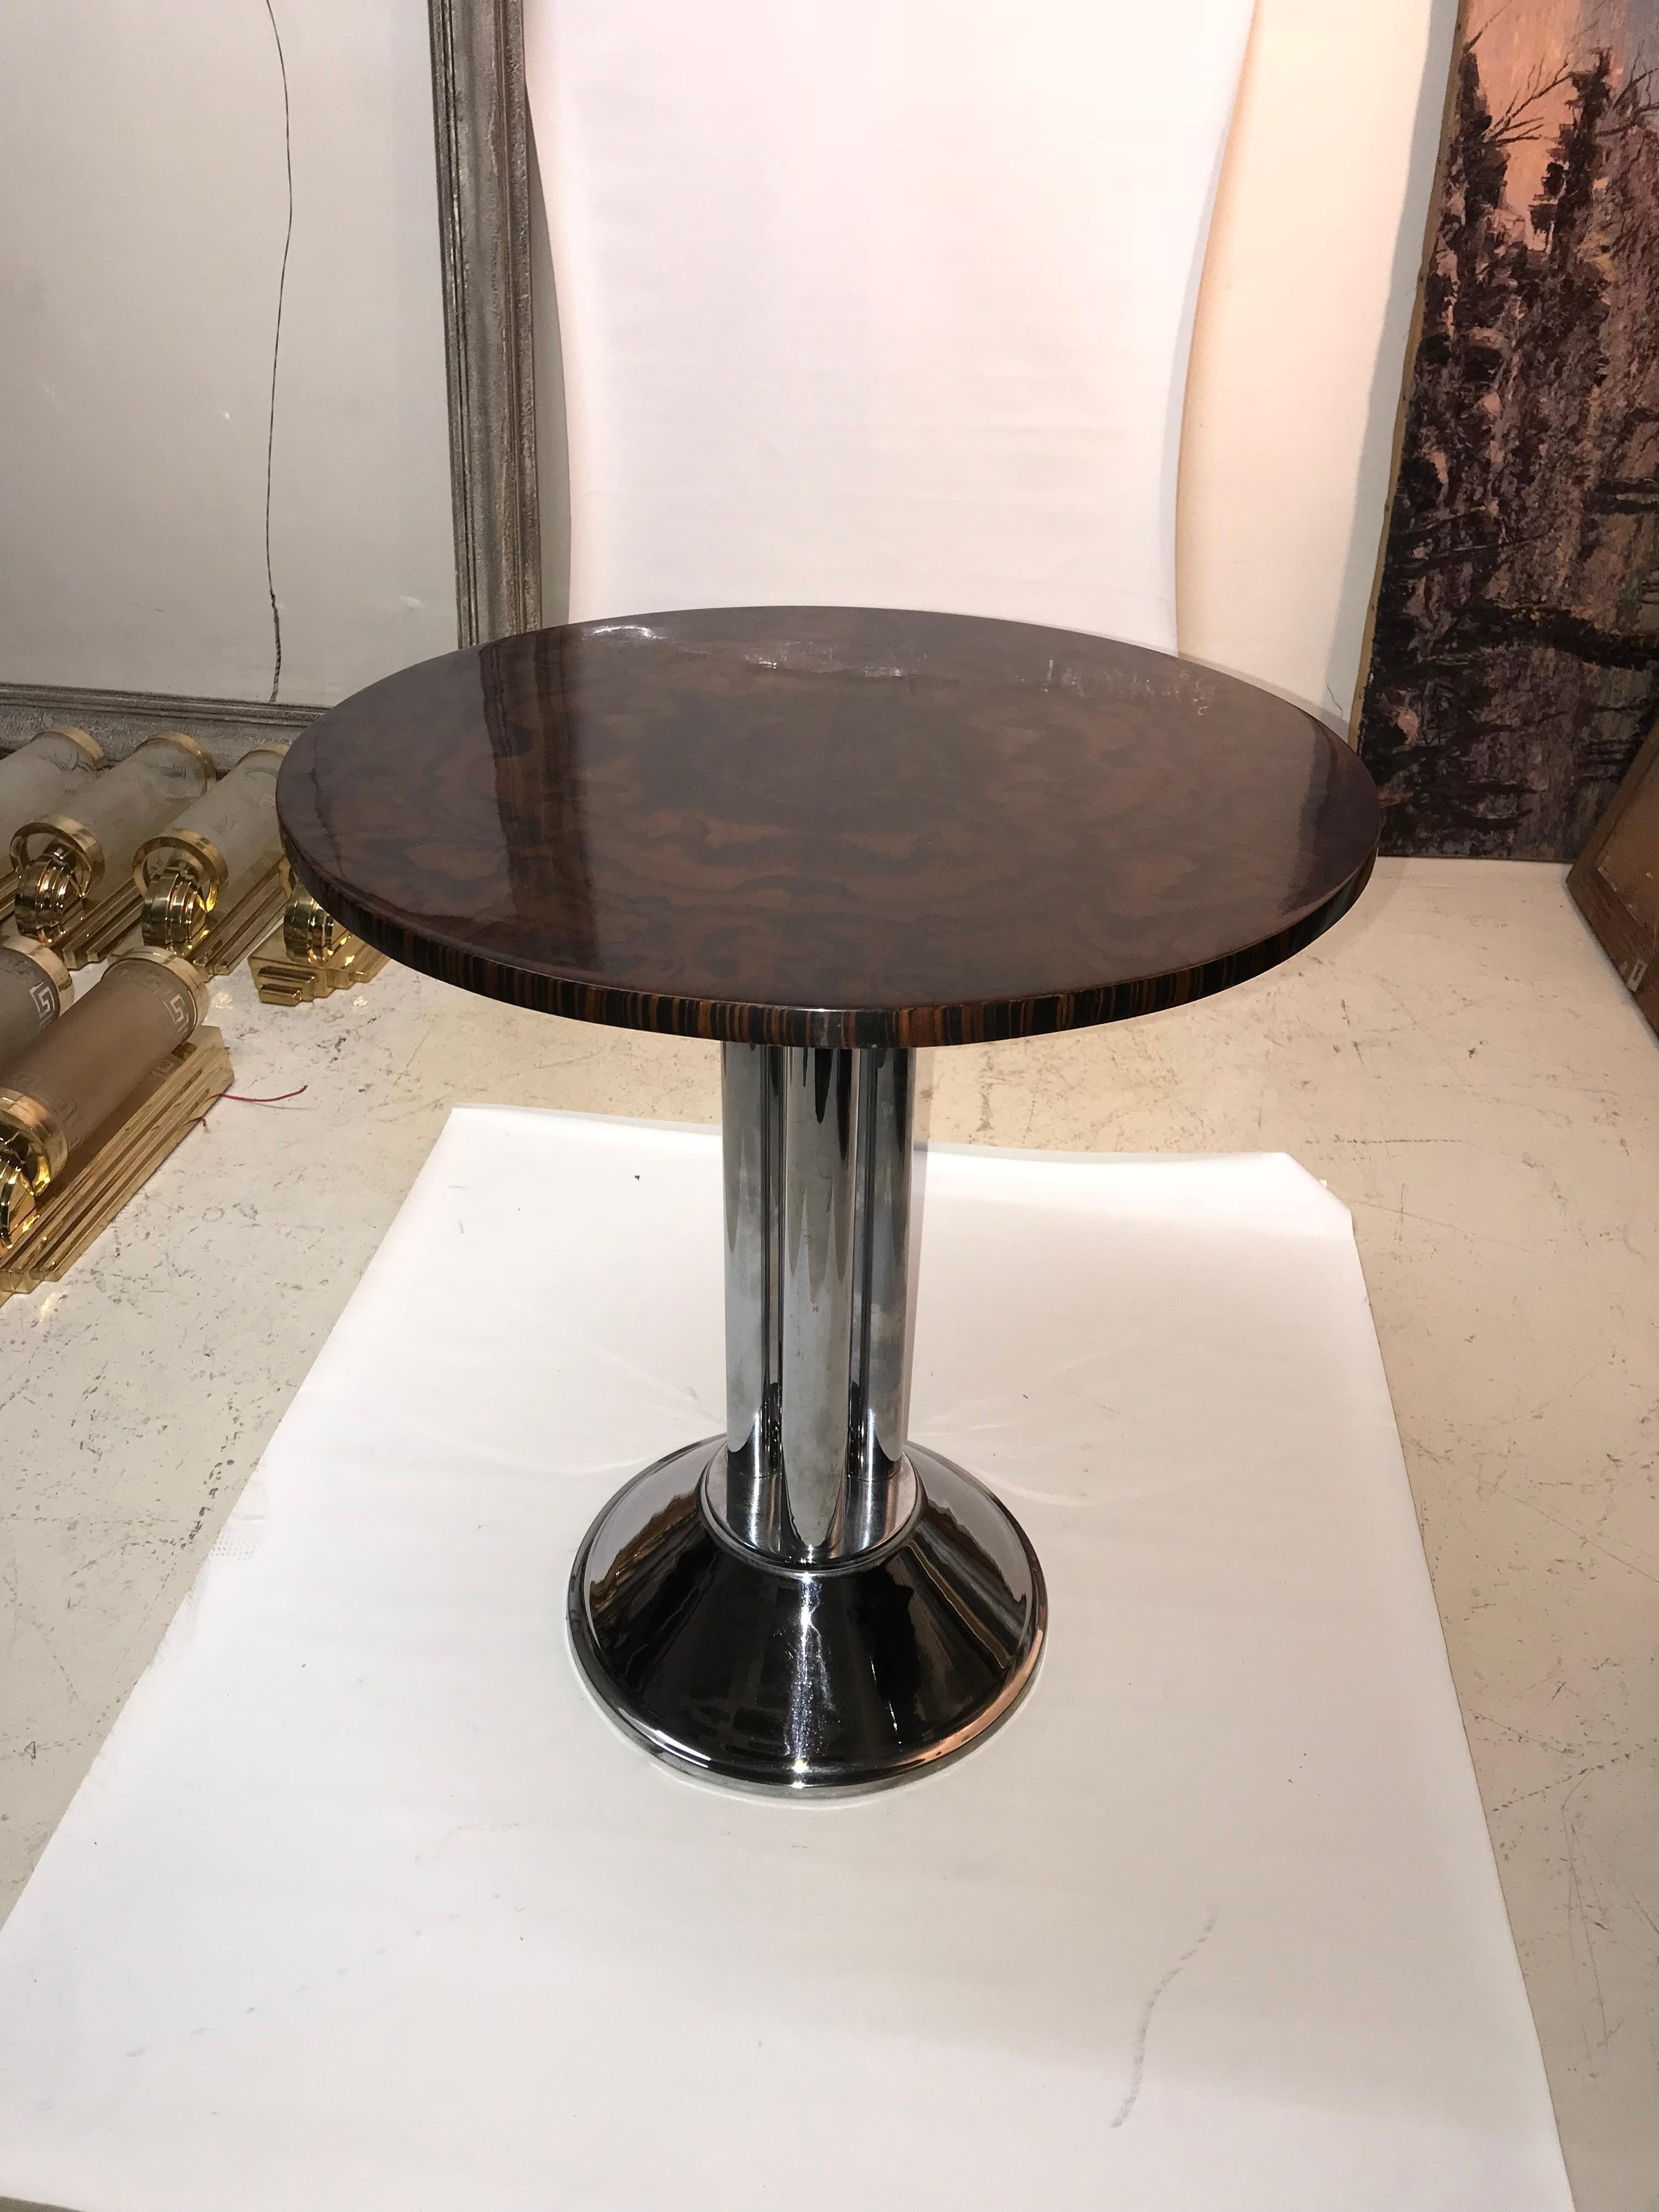 2 Tables in Wood and Chrome, France, 1930 For Sale 1